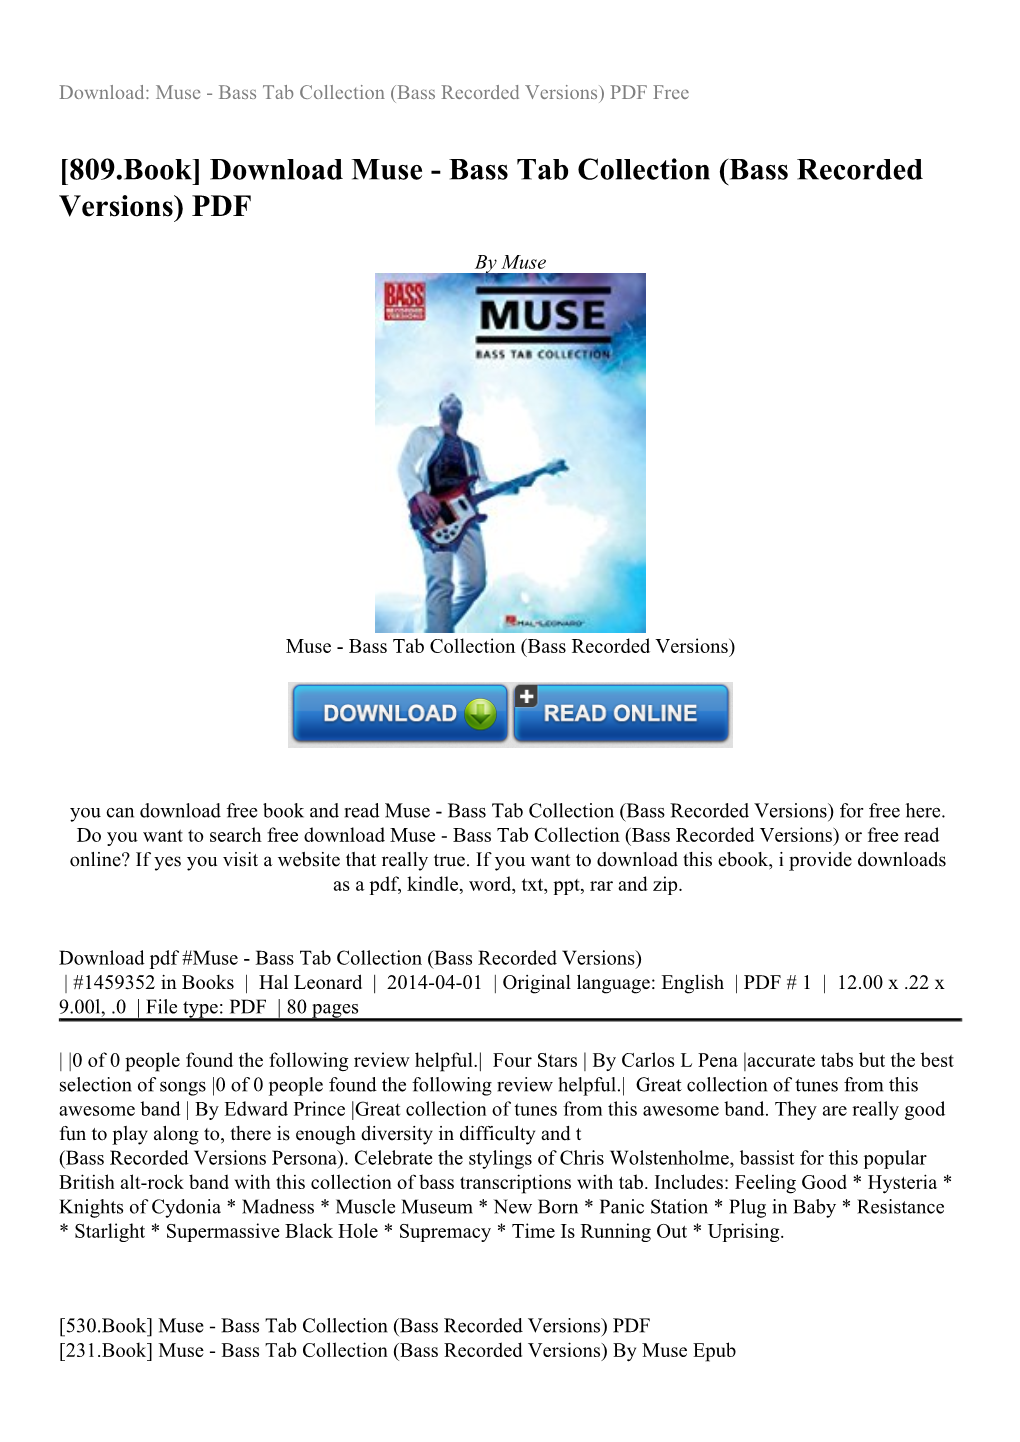 Download Muse - Bass Tab Collection (Bass Recorded Versions) PDF